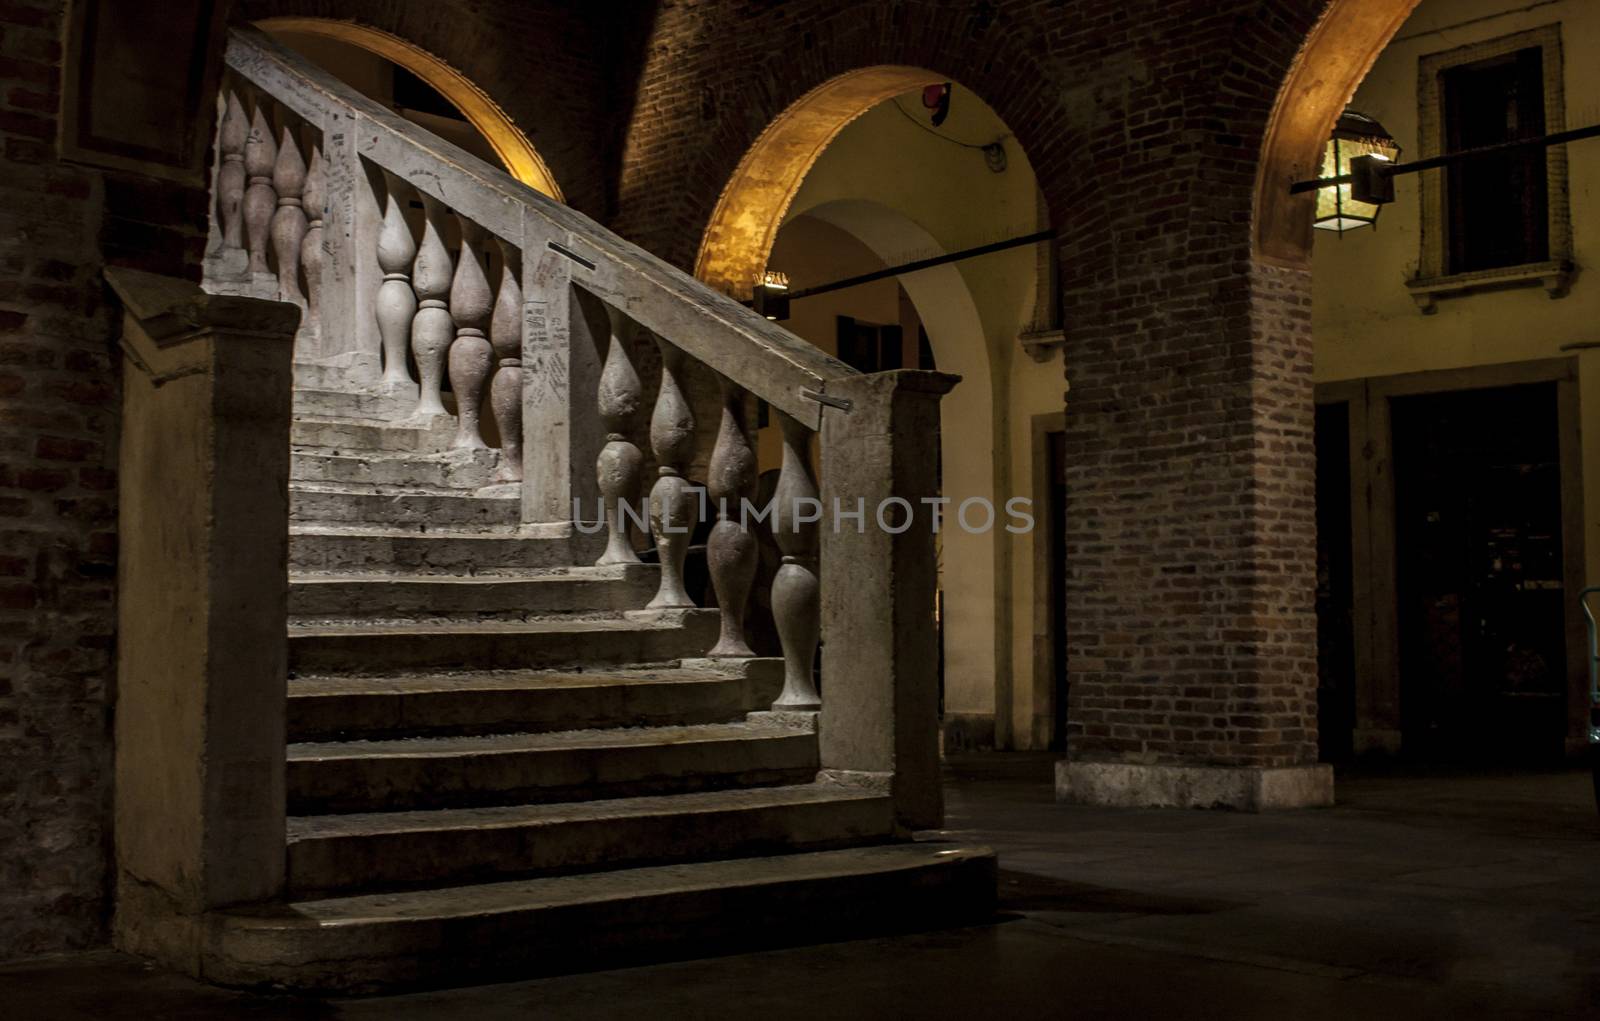 Marble staircase by pippocarlot